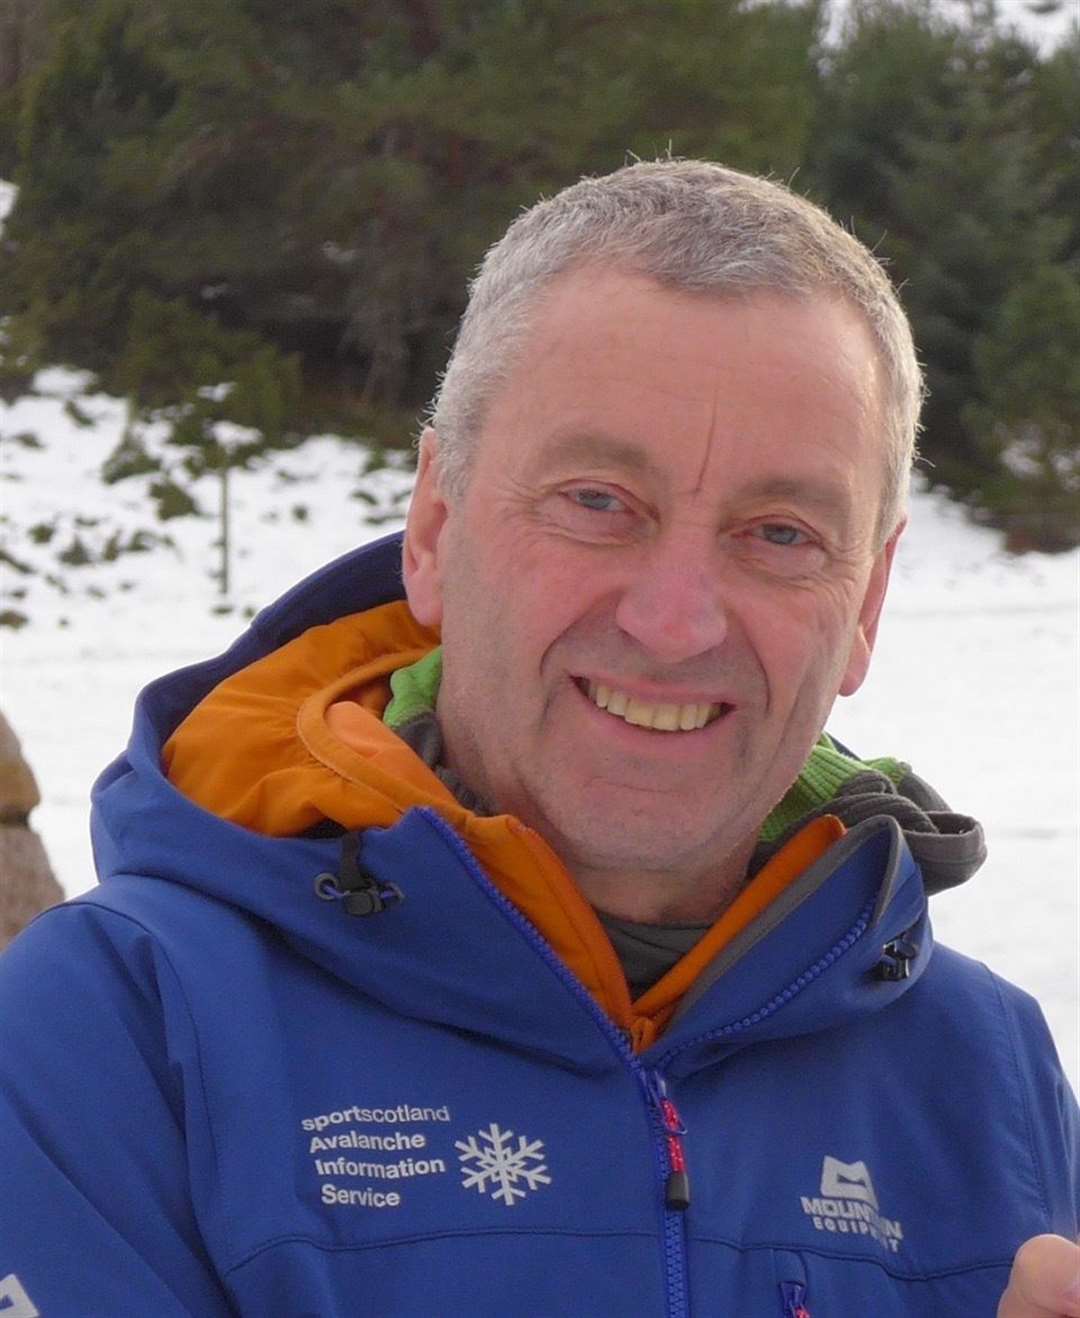 Mark Diggins of the Scottish Avalanche Information Service.